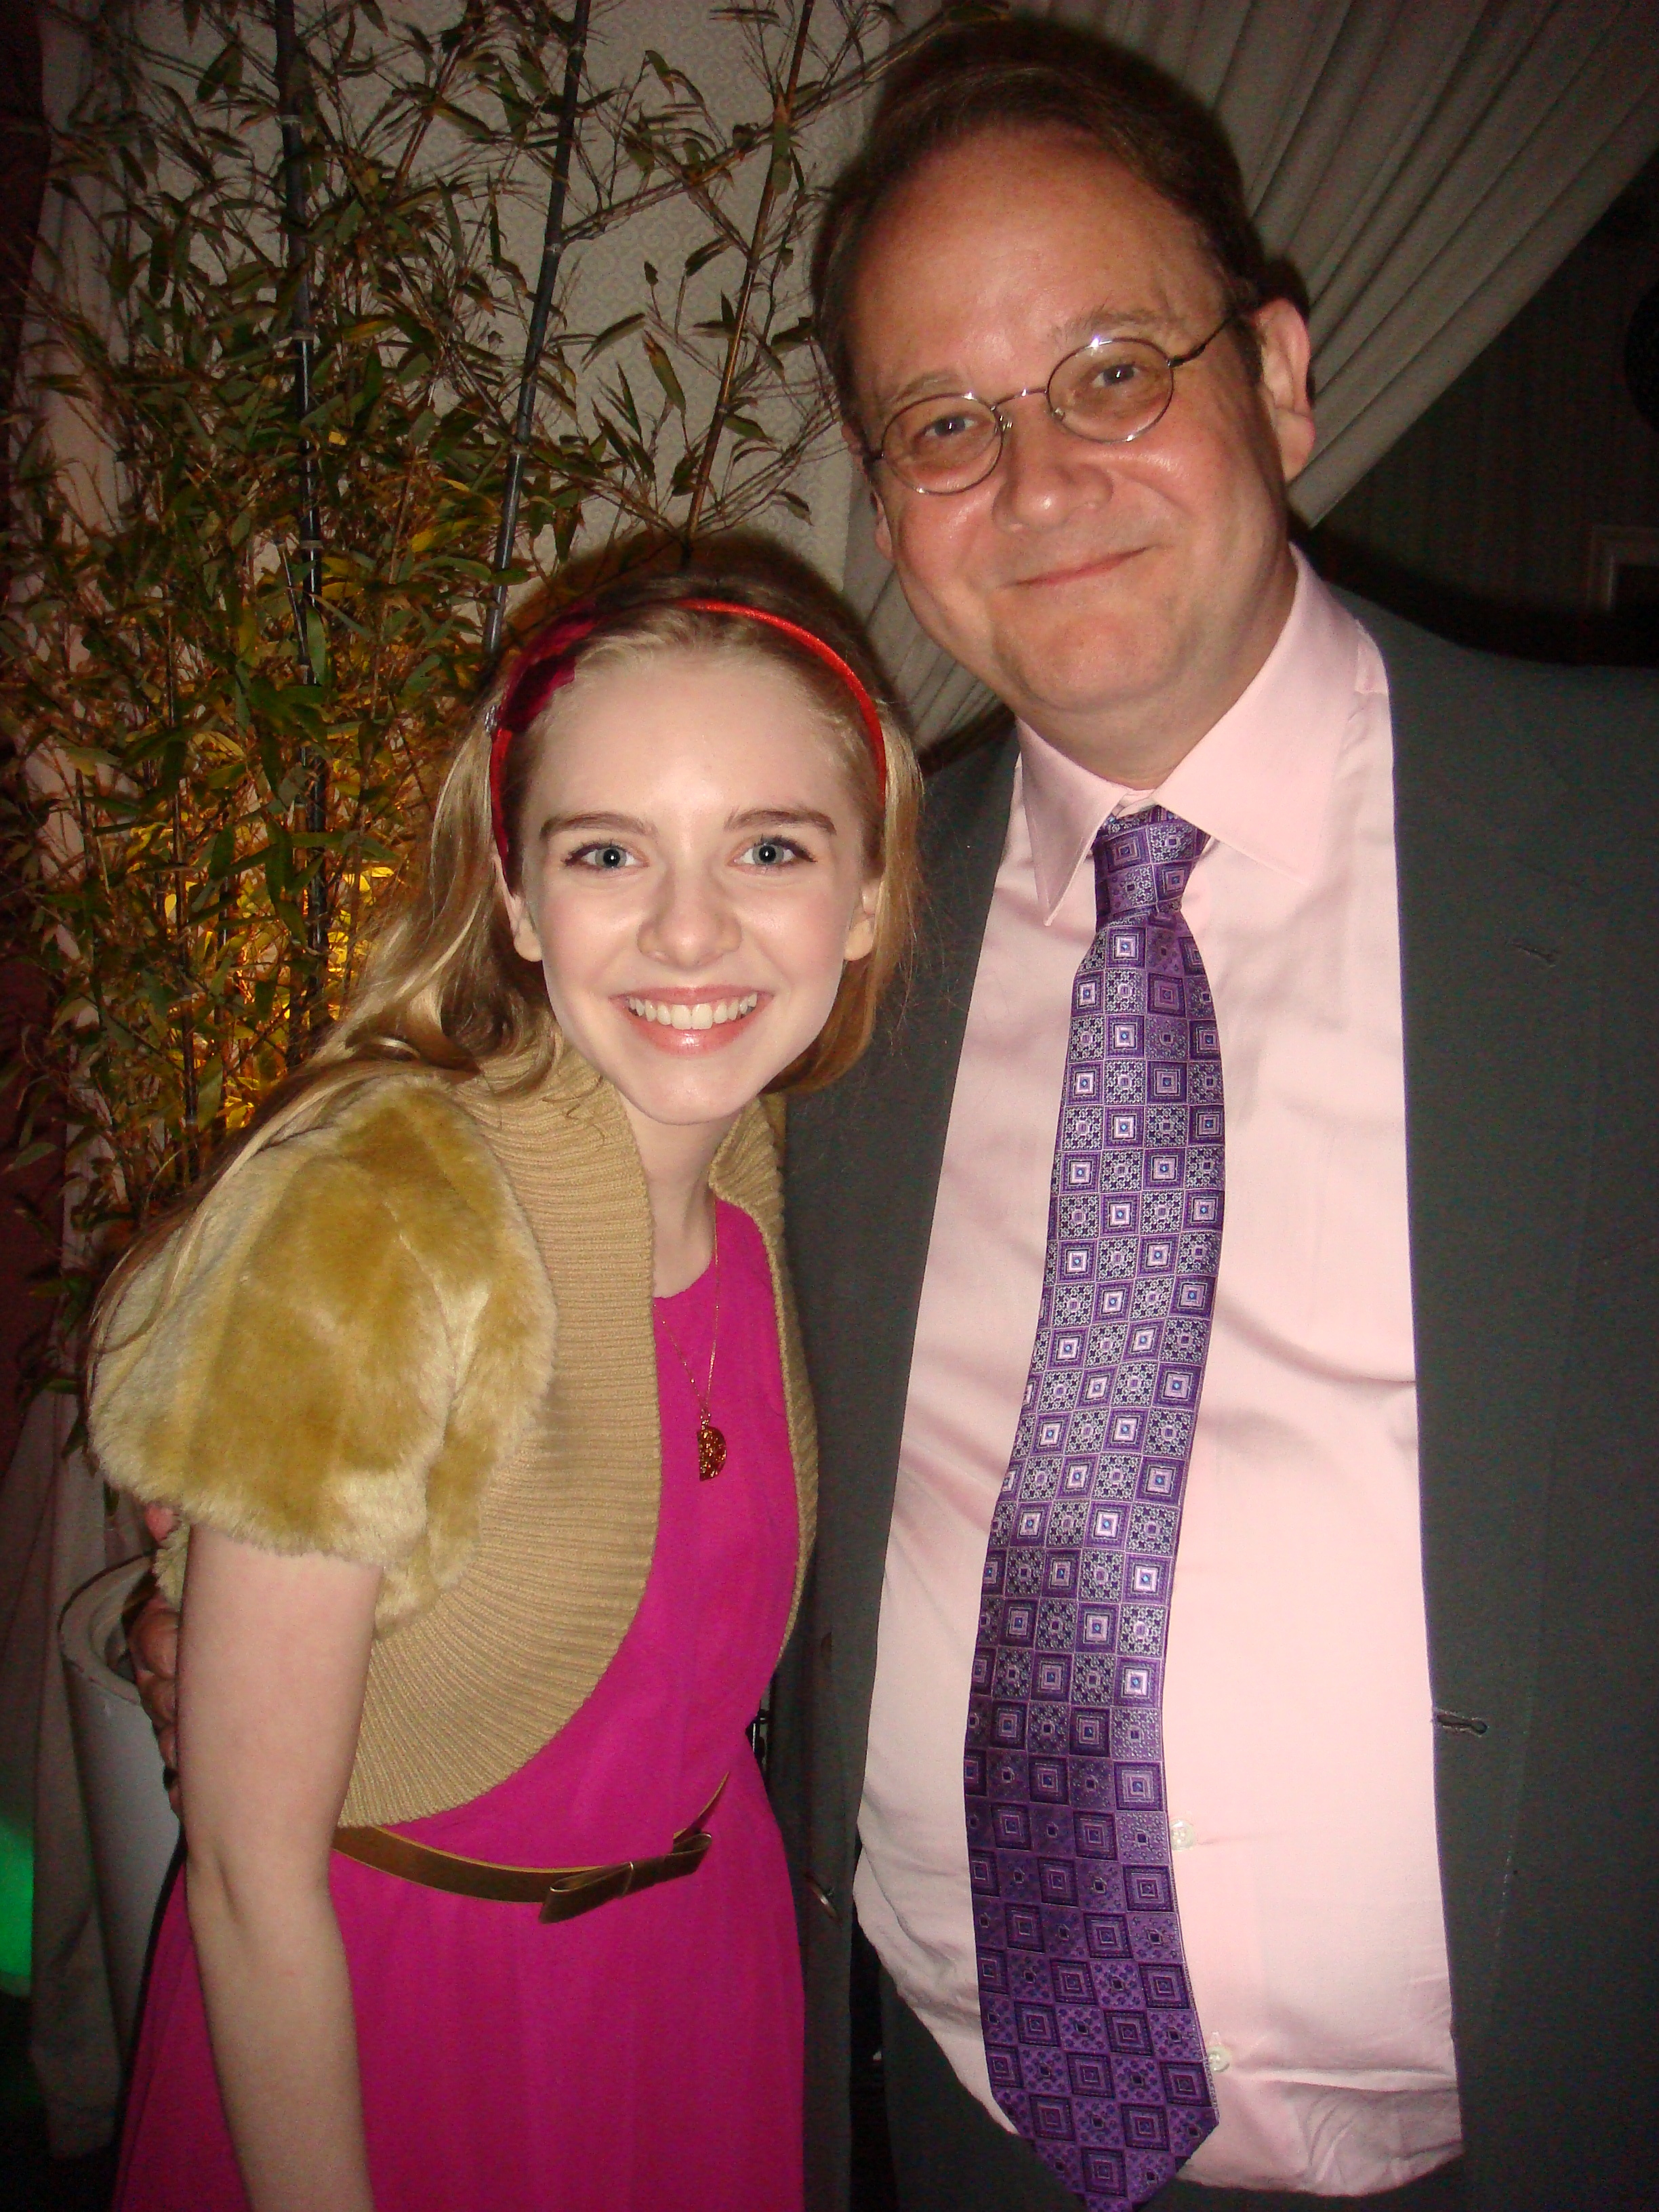 Darcy Rose Byrnes and Marc Cherry